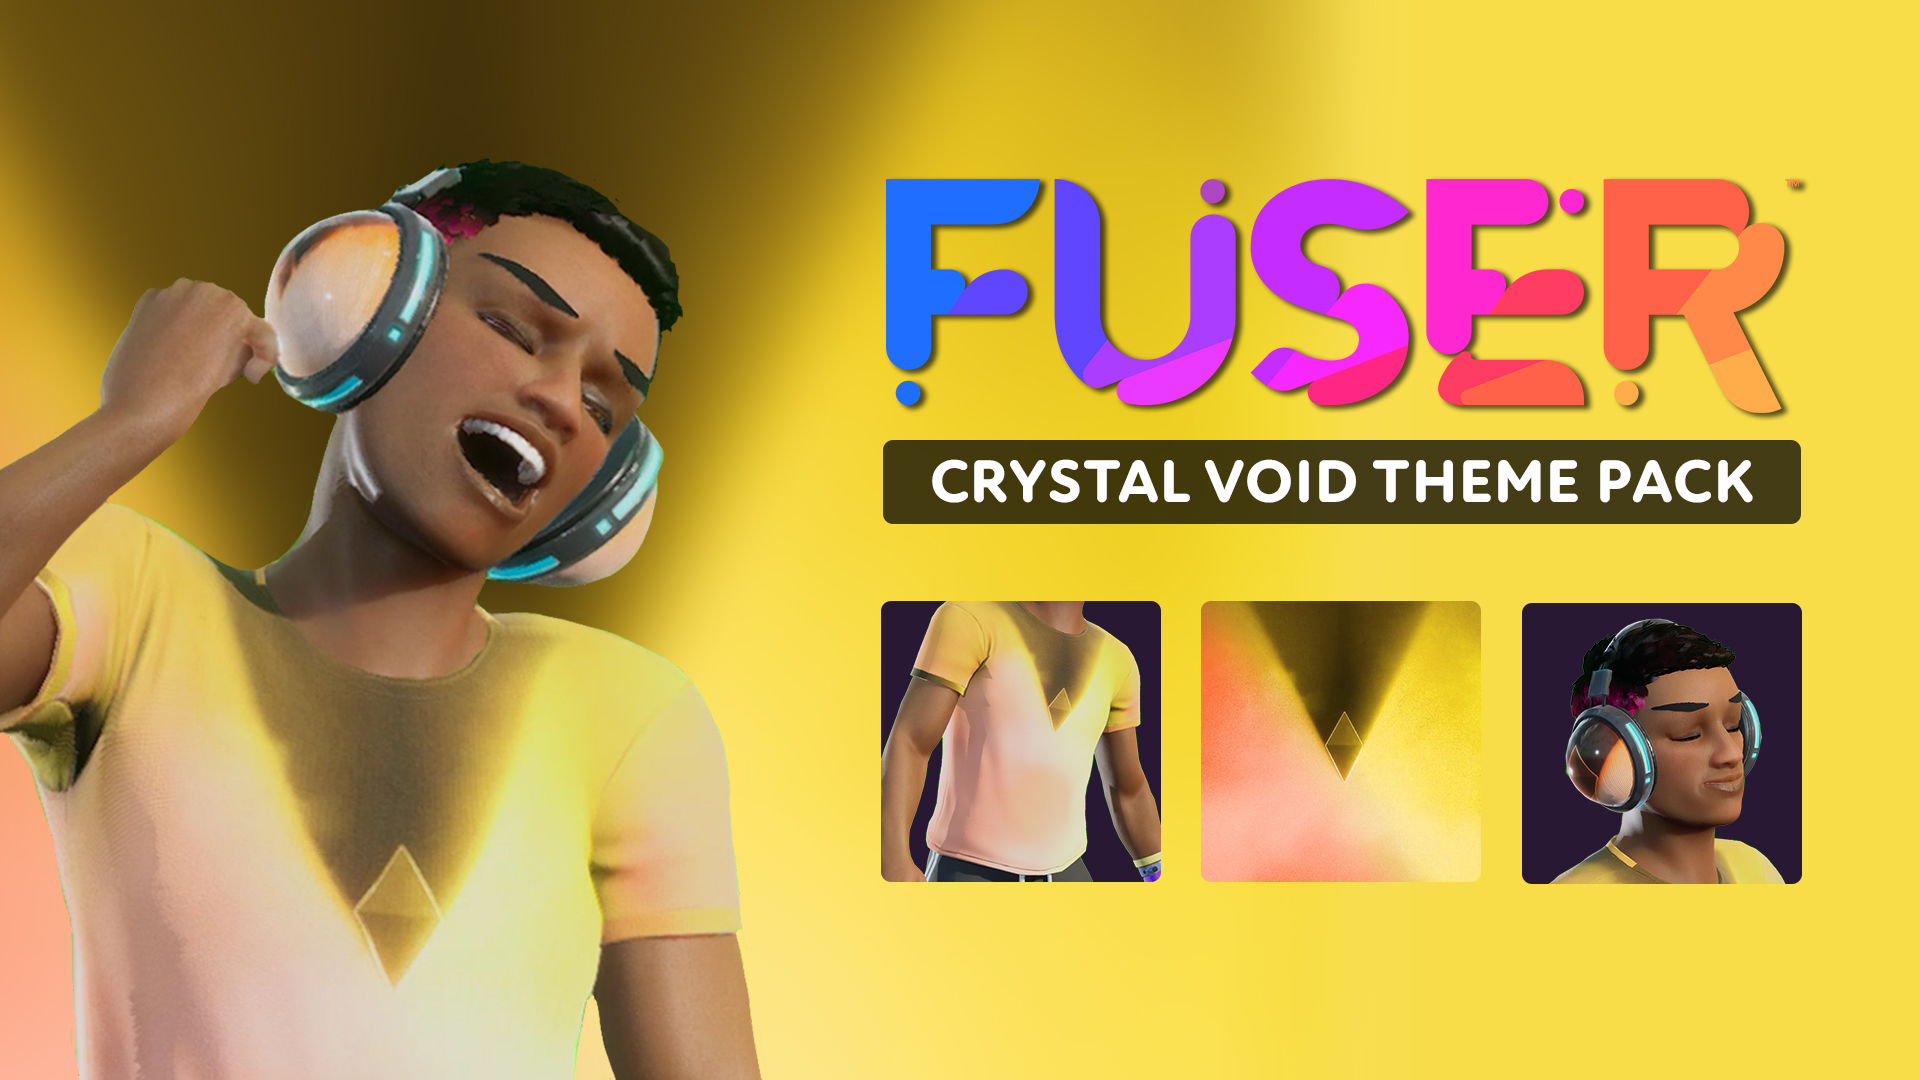 Crystal Void Theme Pack